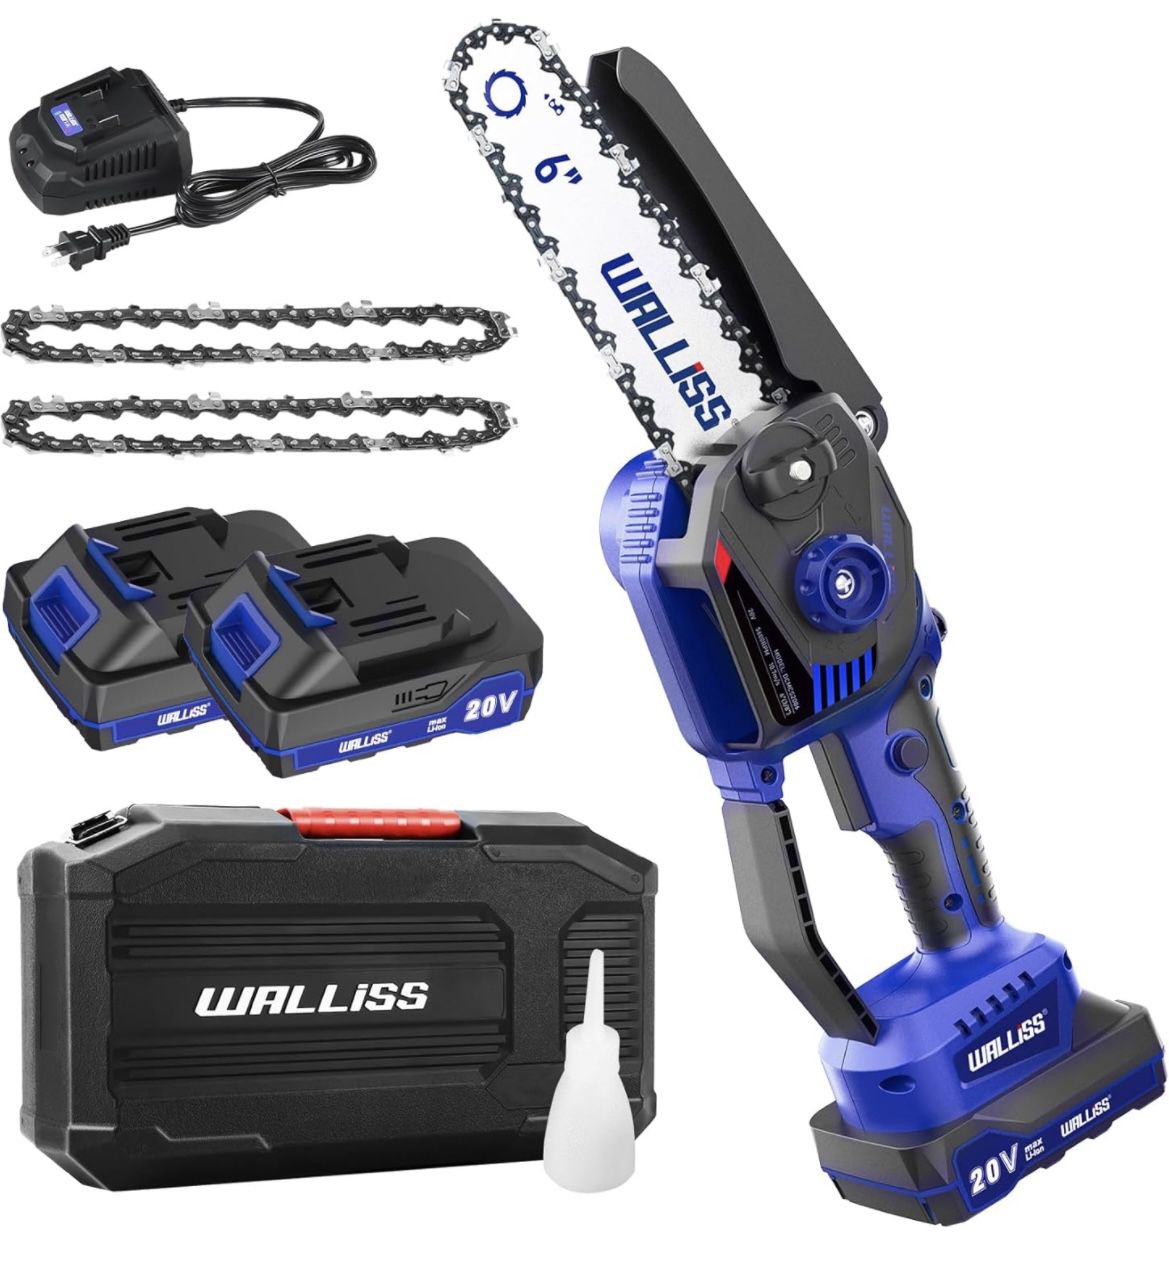 New In Box Mini Cordless Chainsaw 6 Inch Electric Handheld Power Saw with 35ft/s Chain Speed-Battery-Powered